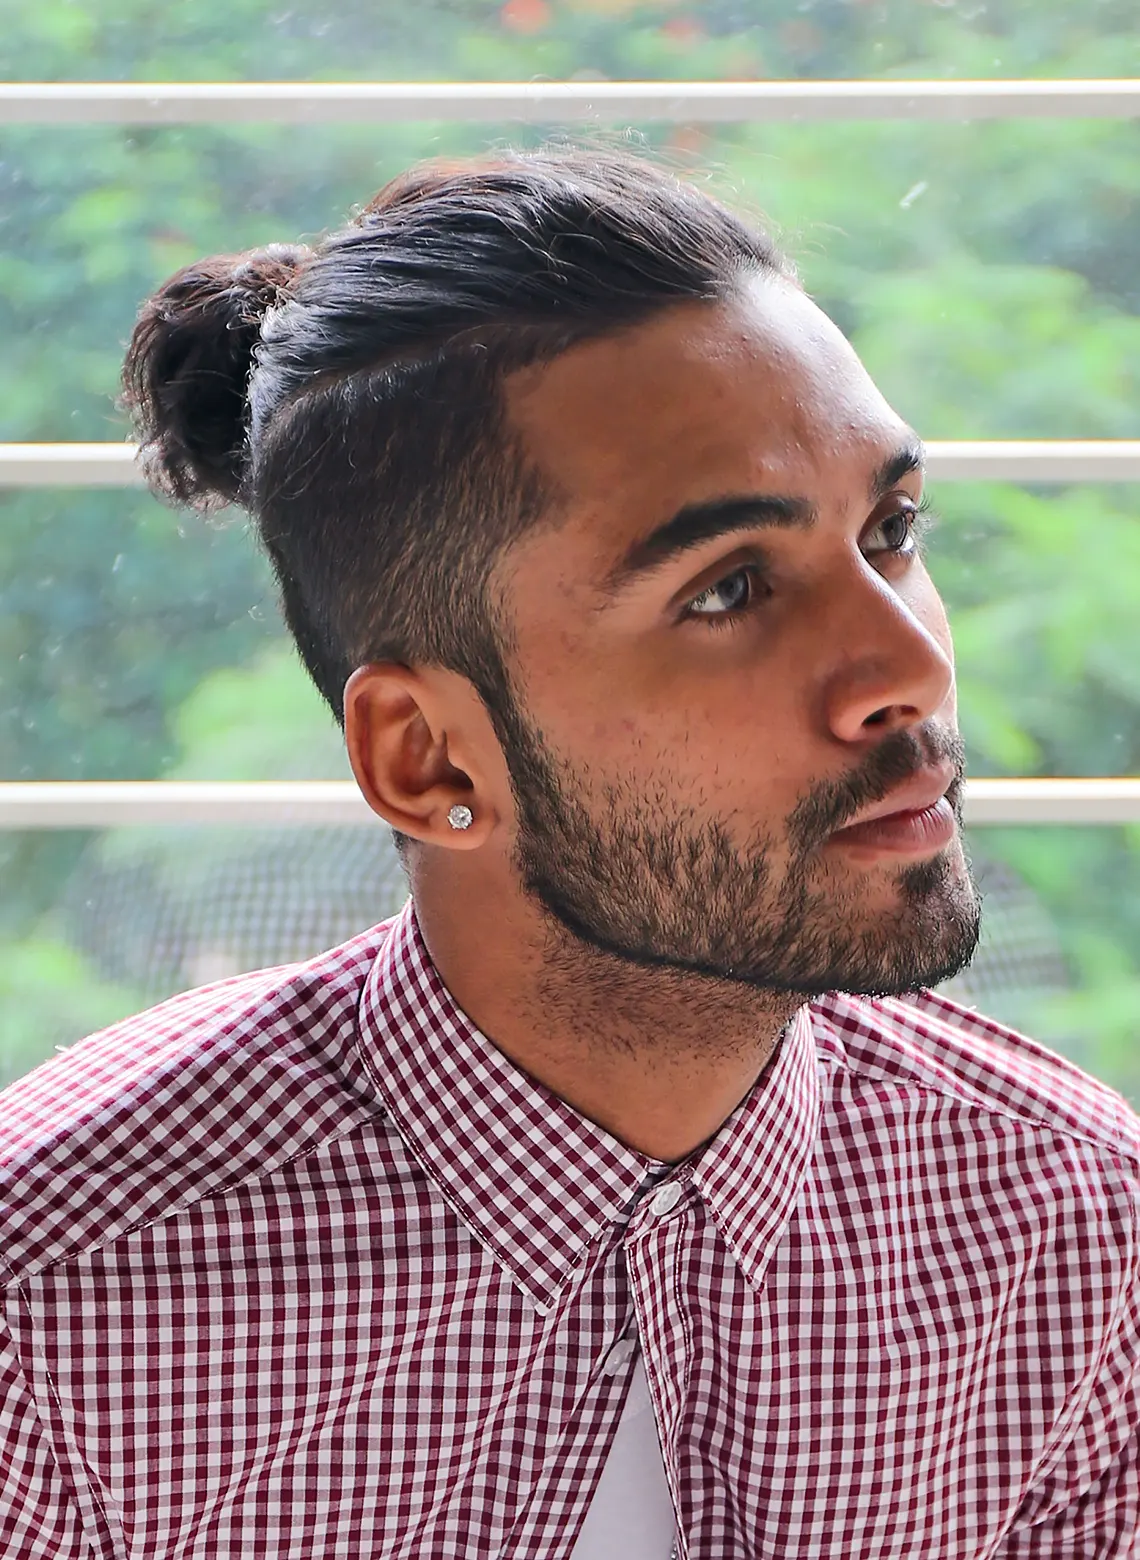 10 Real Problems Of Getting An Undercut That No One Actually Talks About